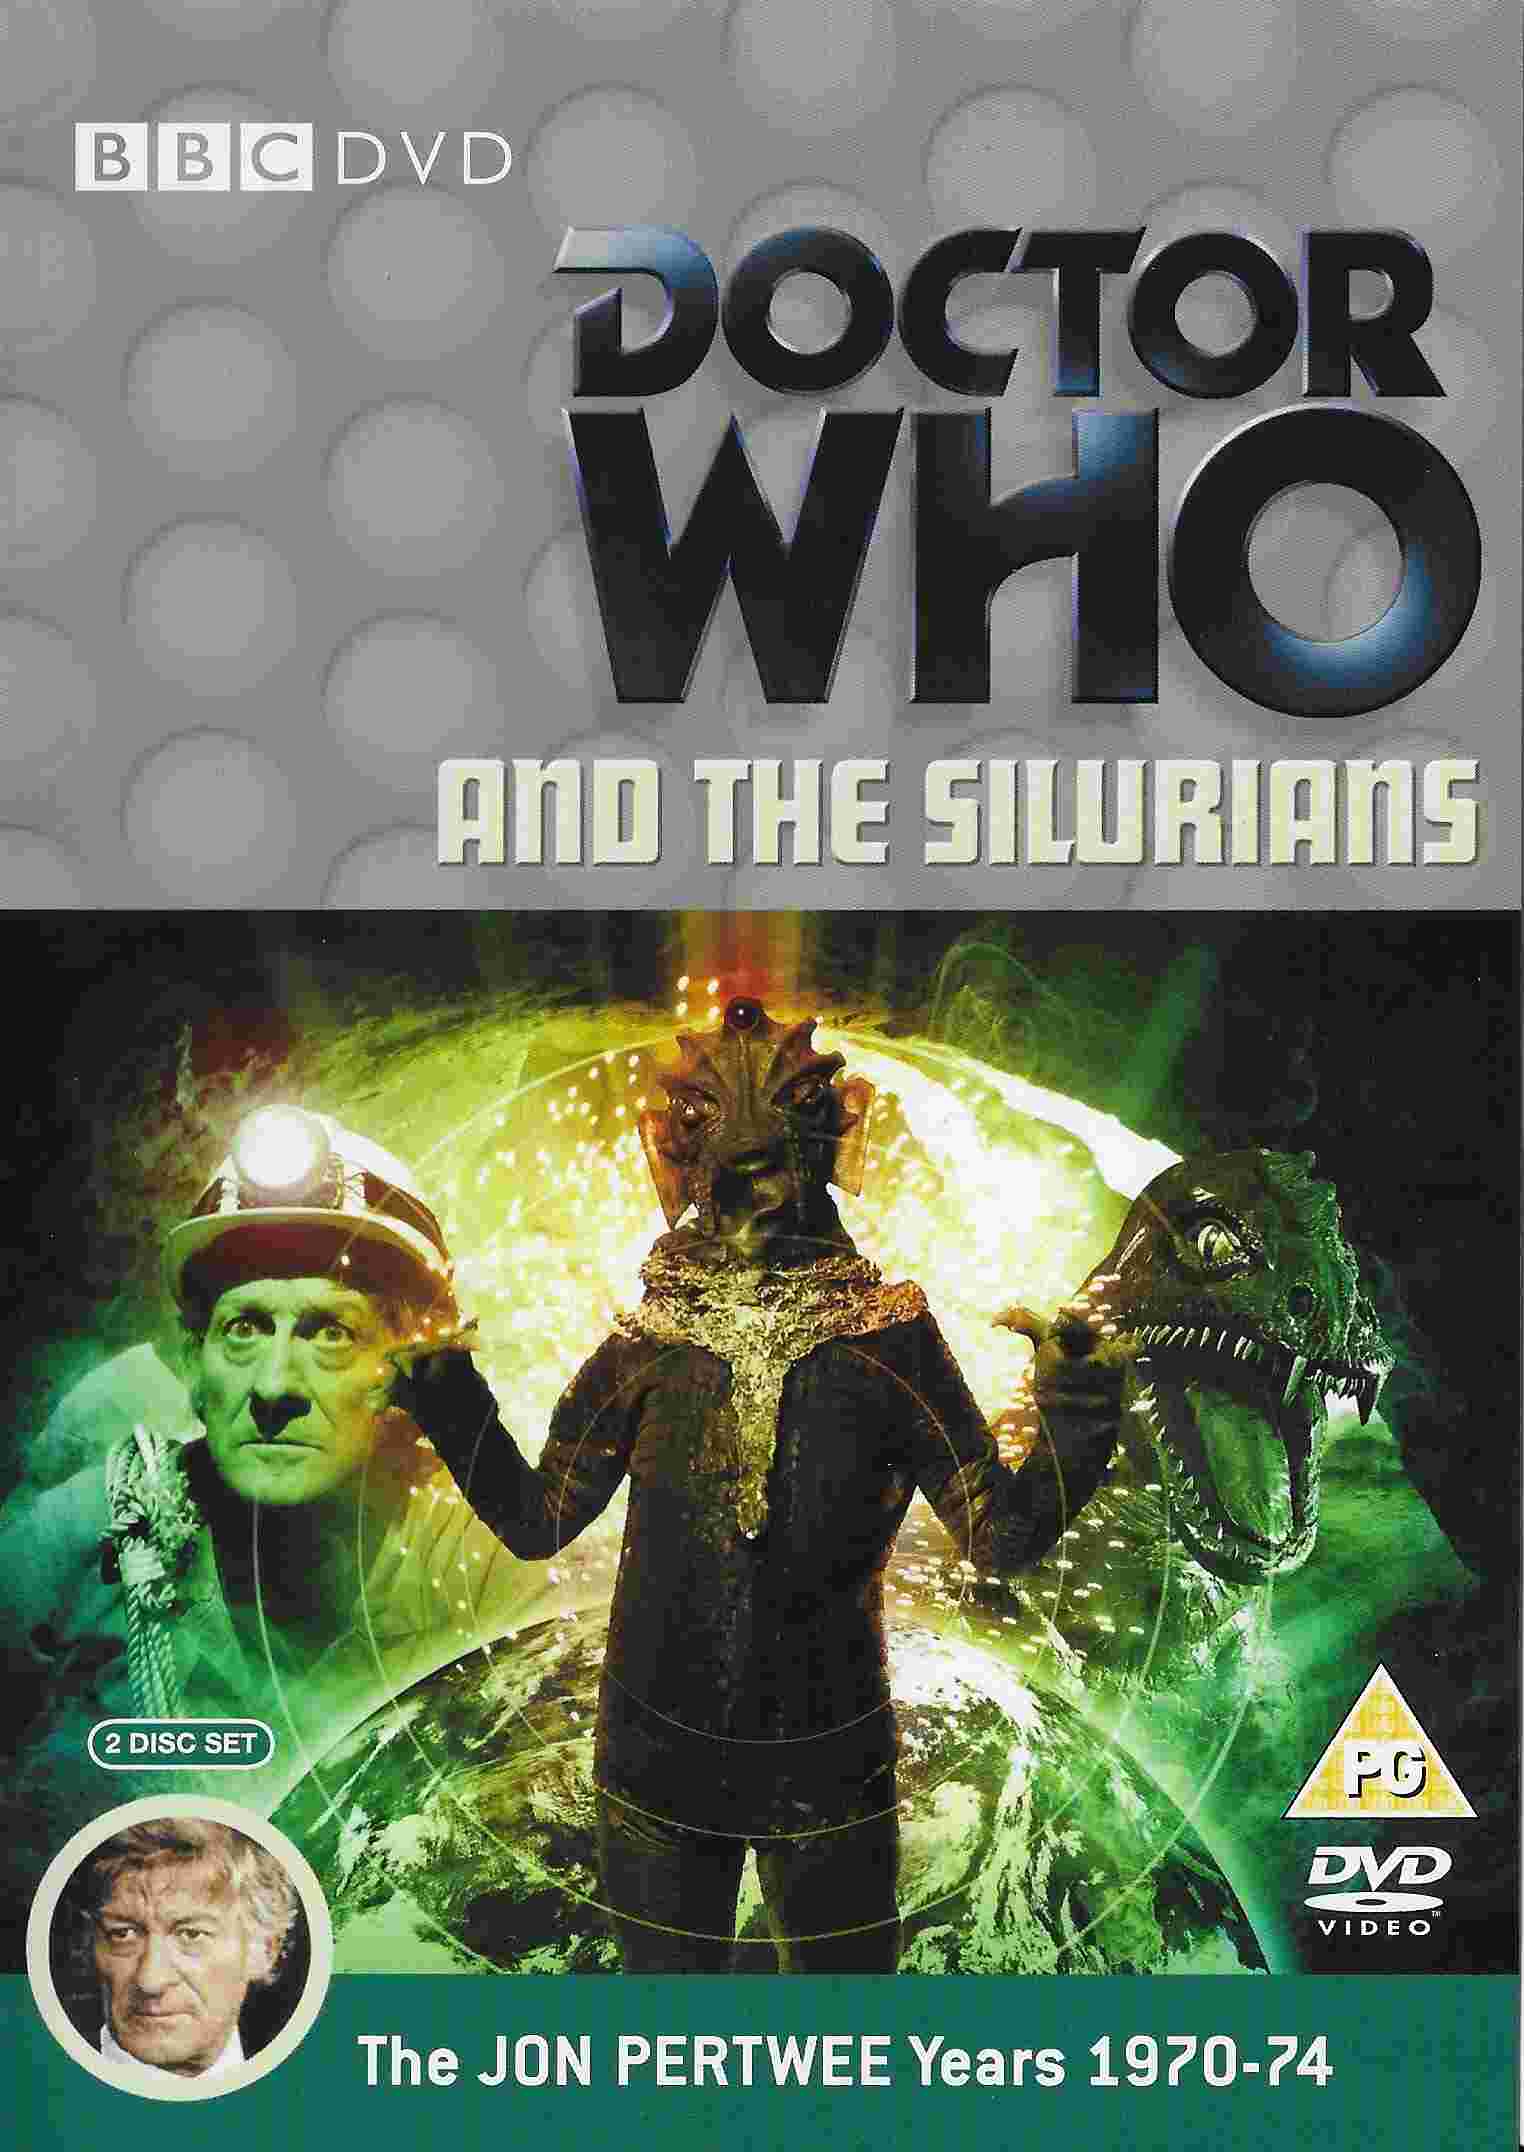 Picture of BBCDVD 2438A Doctor Who - The Silurians by artist Malcolm Hulke from the BBC dvds - Records and Tapes library